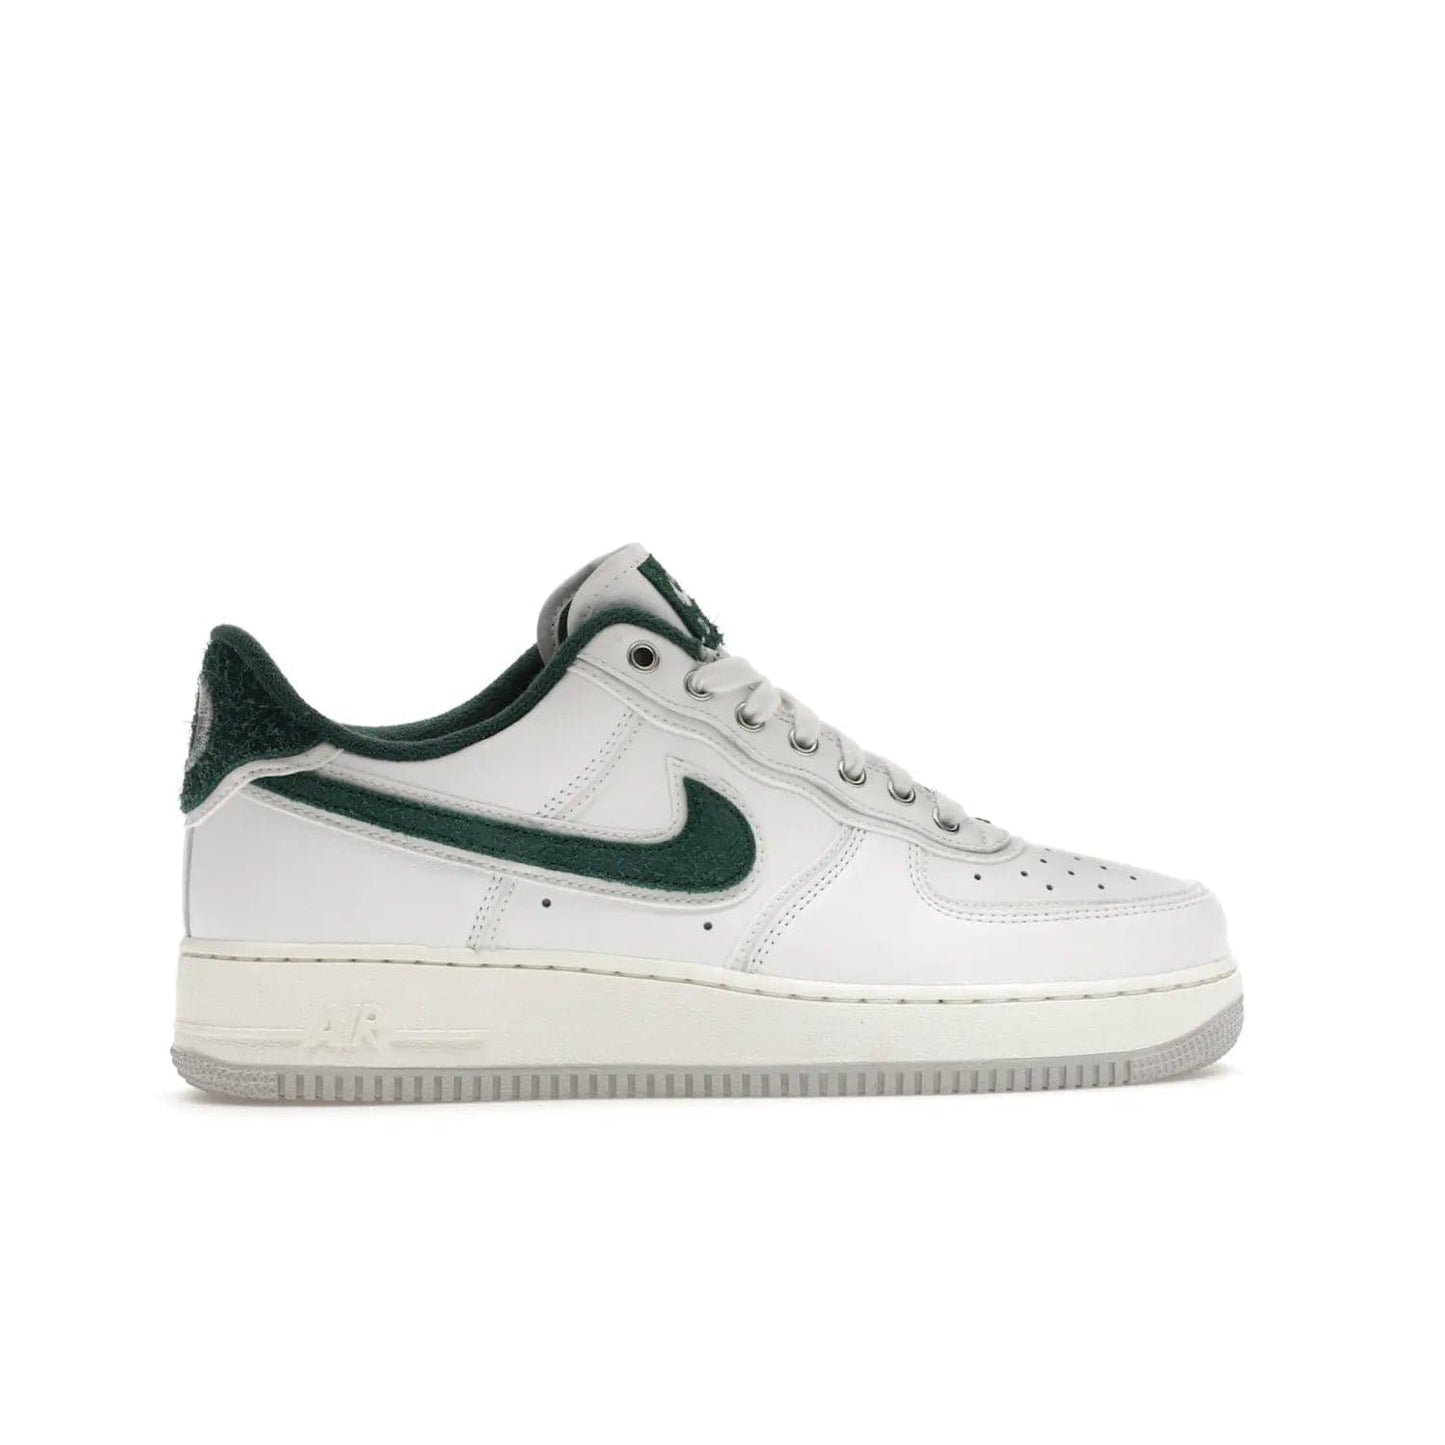 Nike Air Force 1 Low '07 Premium University of Oregon PE - Image 36 - Only at www.BallersClubKickz.com - The Nike Air Force 1 Low '07 Premium. Special Oregon University colorway. White base with green and sail accents. Cushioned rubber midsole. Comfort and style. Support your school!